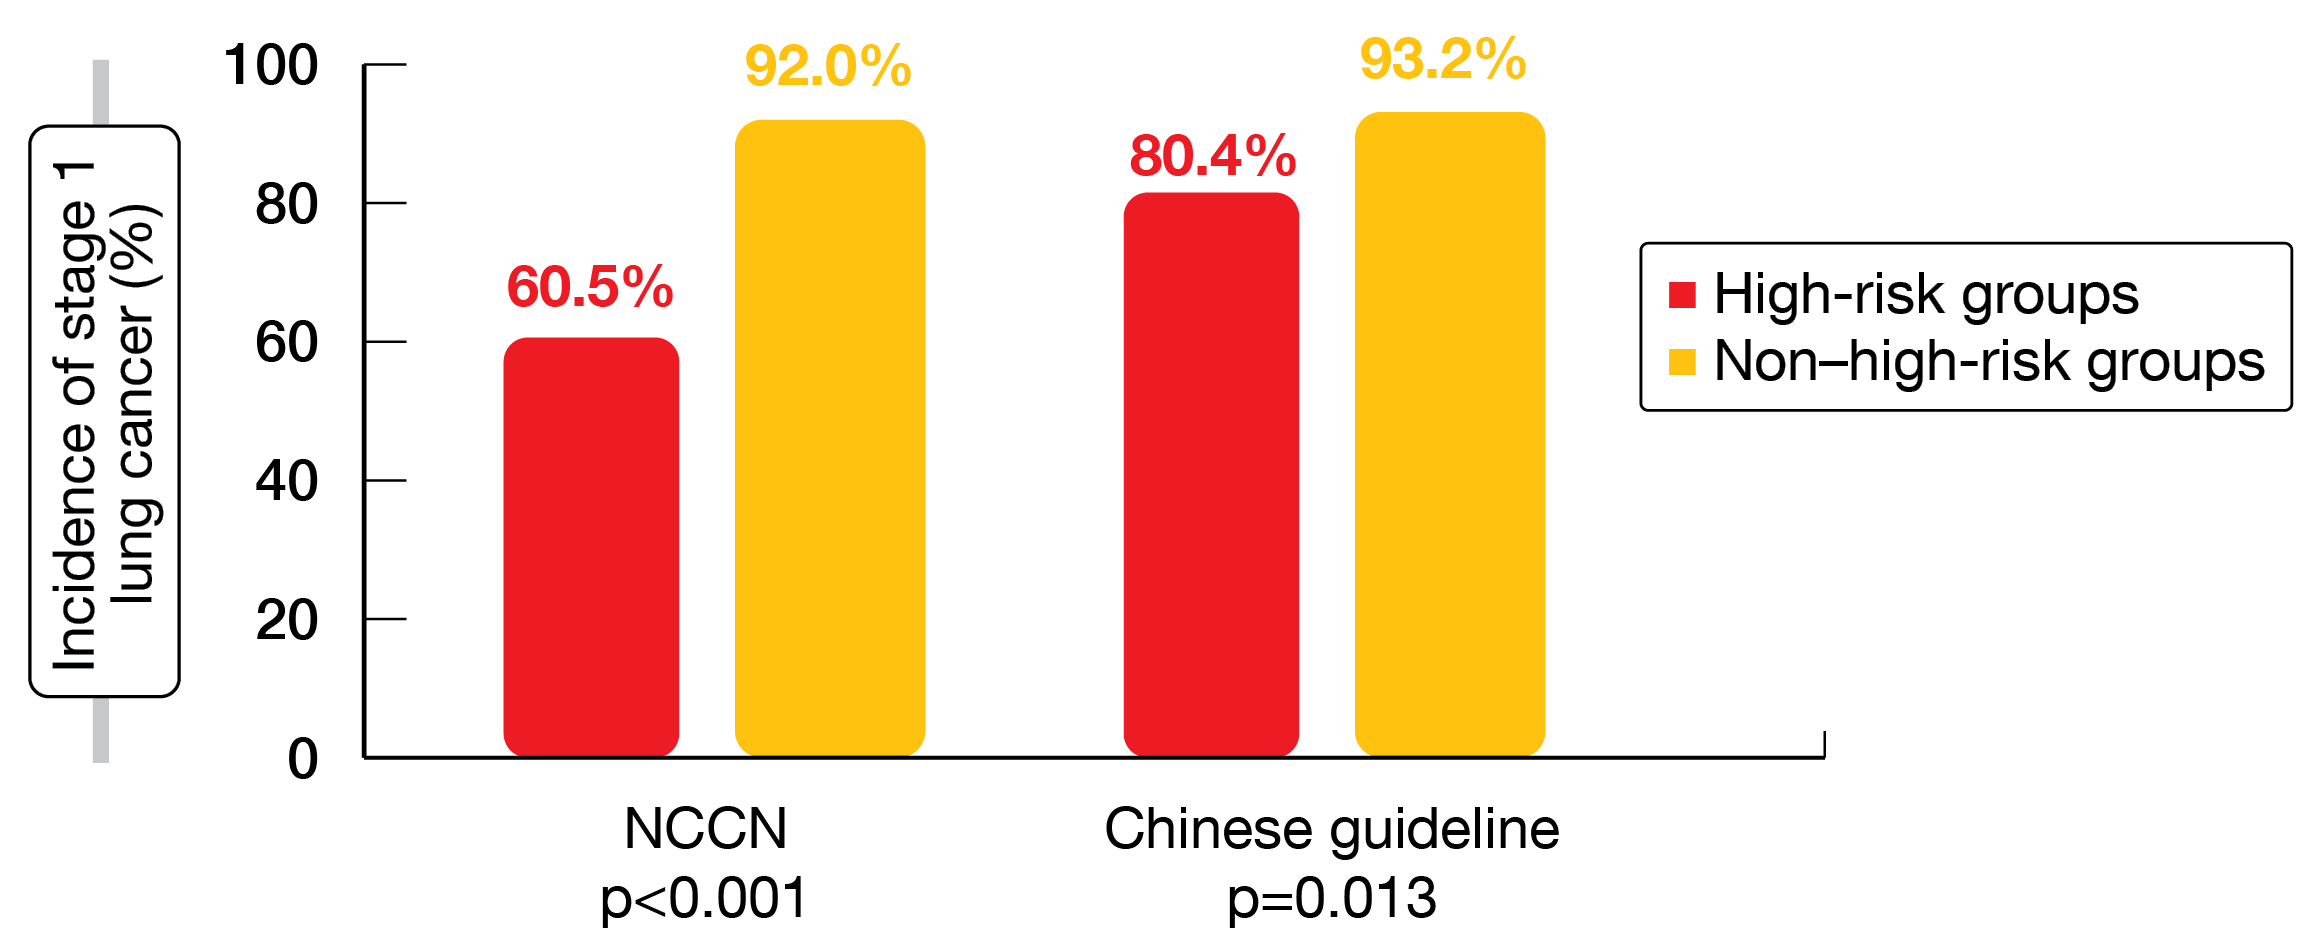 Figure: Incidence of stage 1 lung cancers in the screened population stratified by risk criteria according to the NCCN and Chinese guidelines